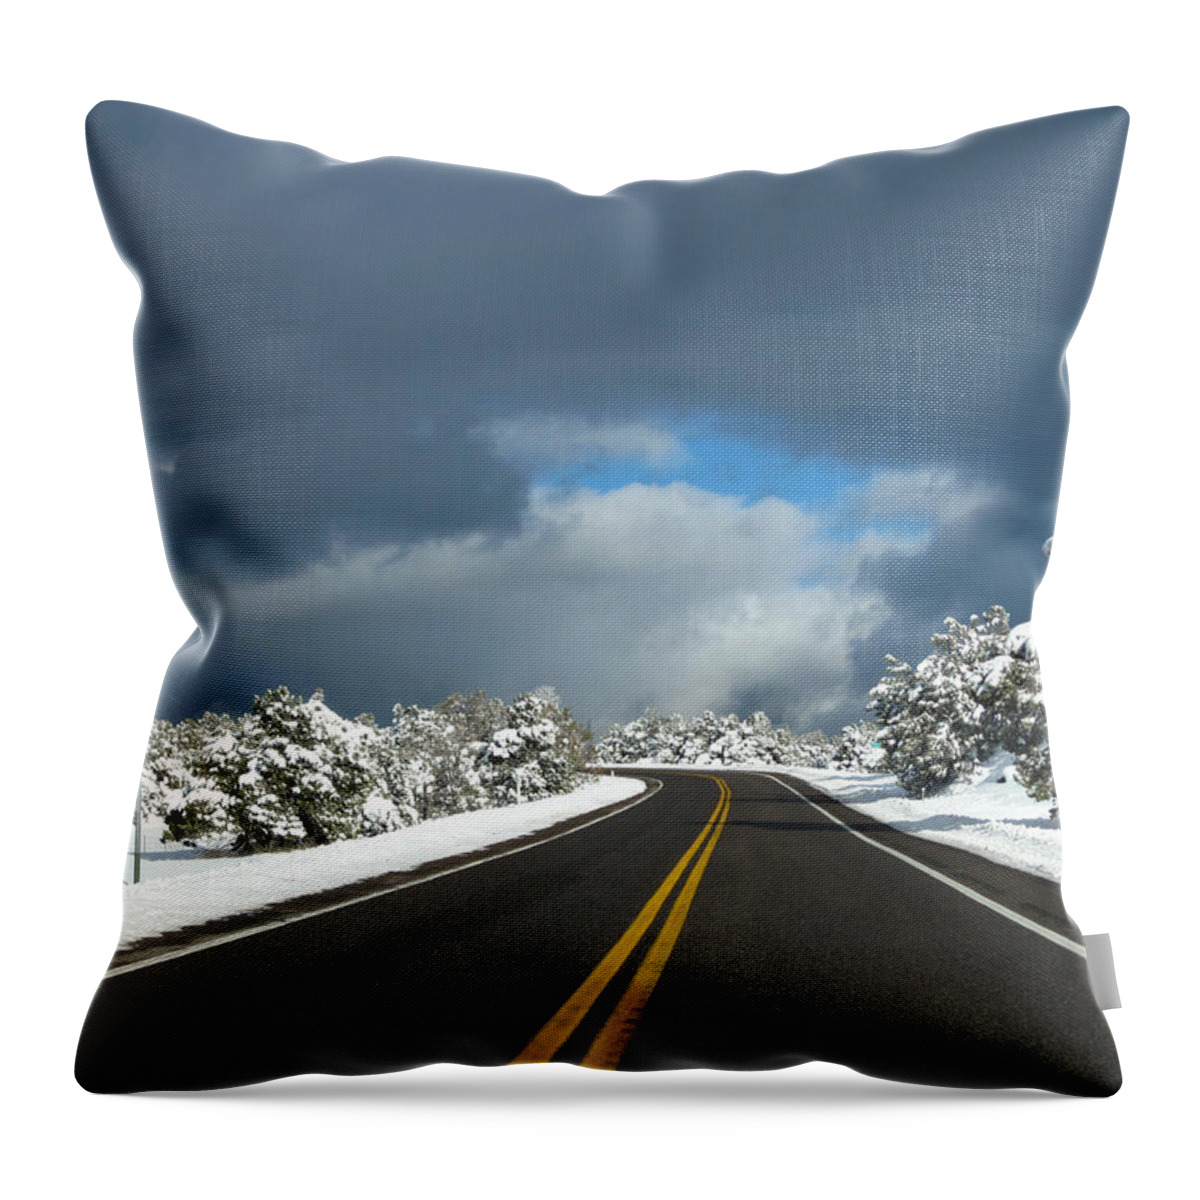  Throw Pillow featuring the photograph Arizona Snow 1 by Gregory Daley MPSA